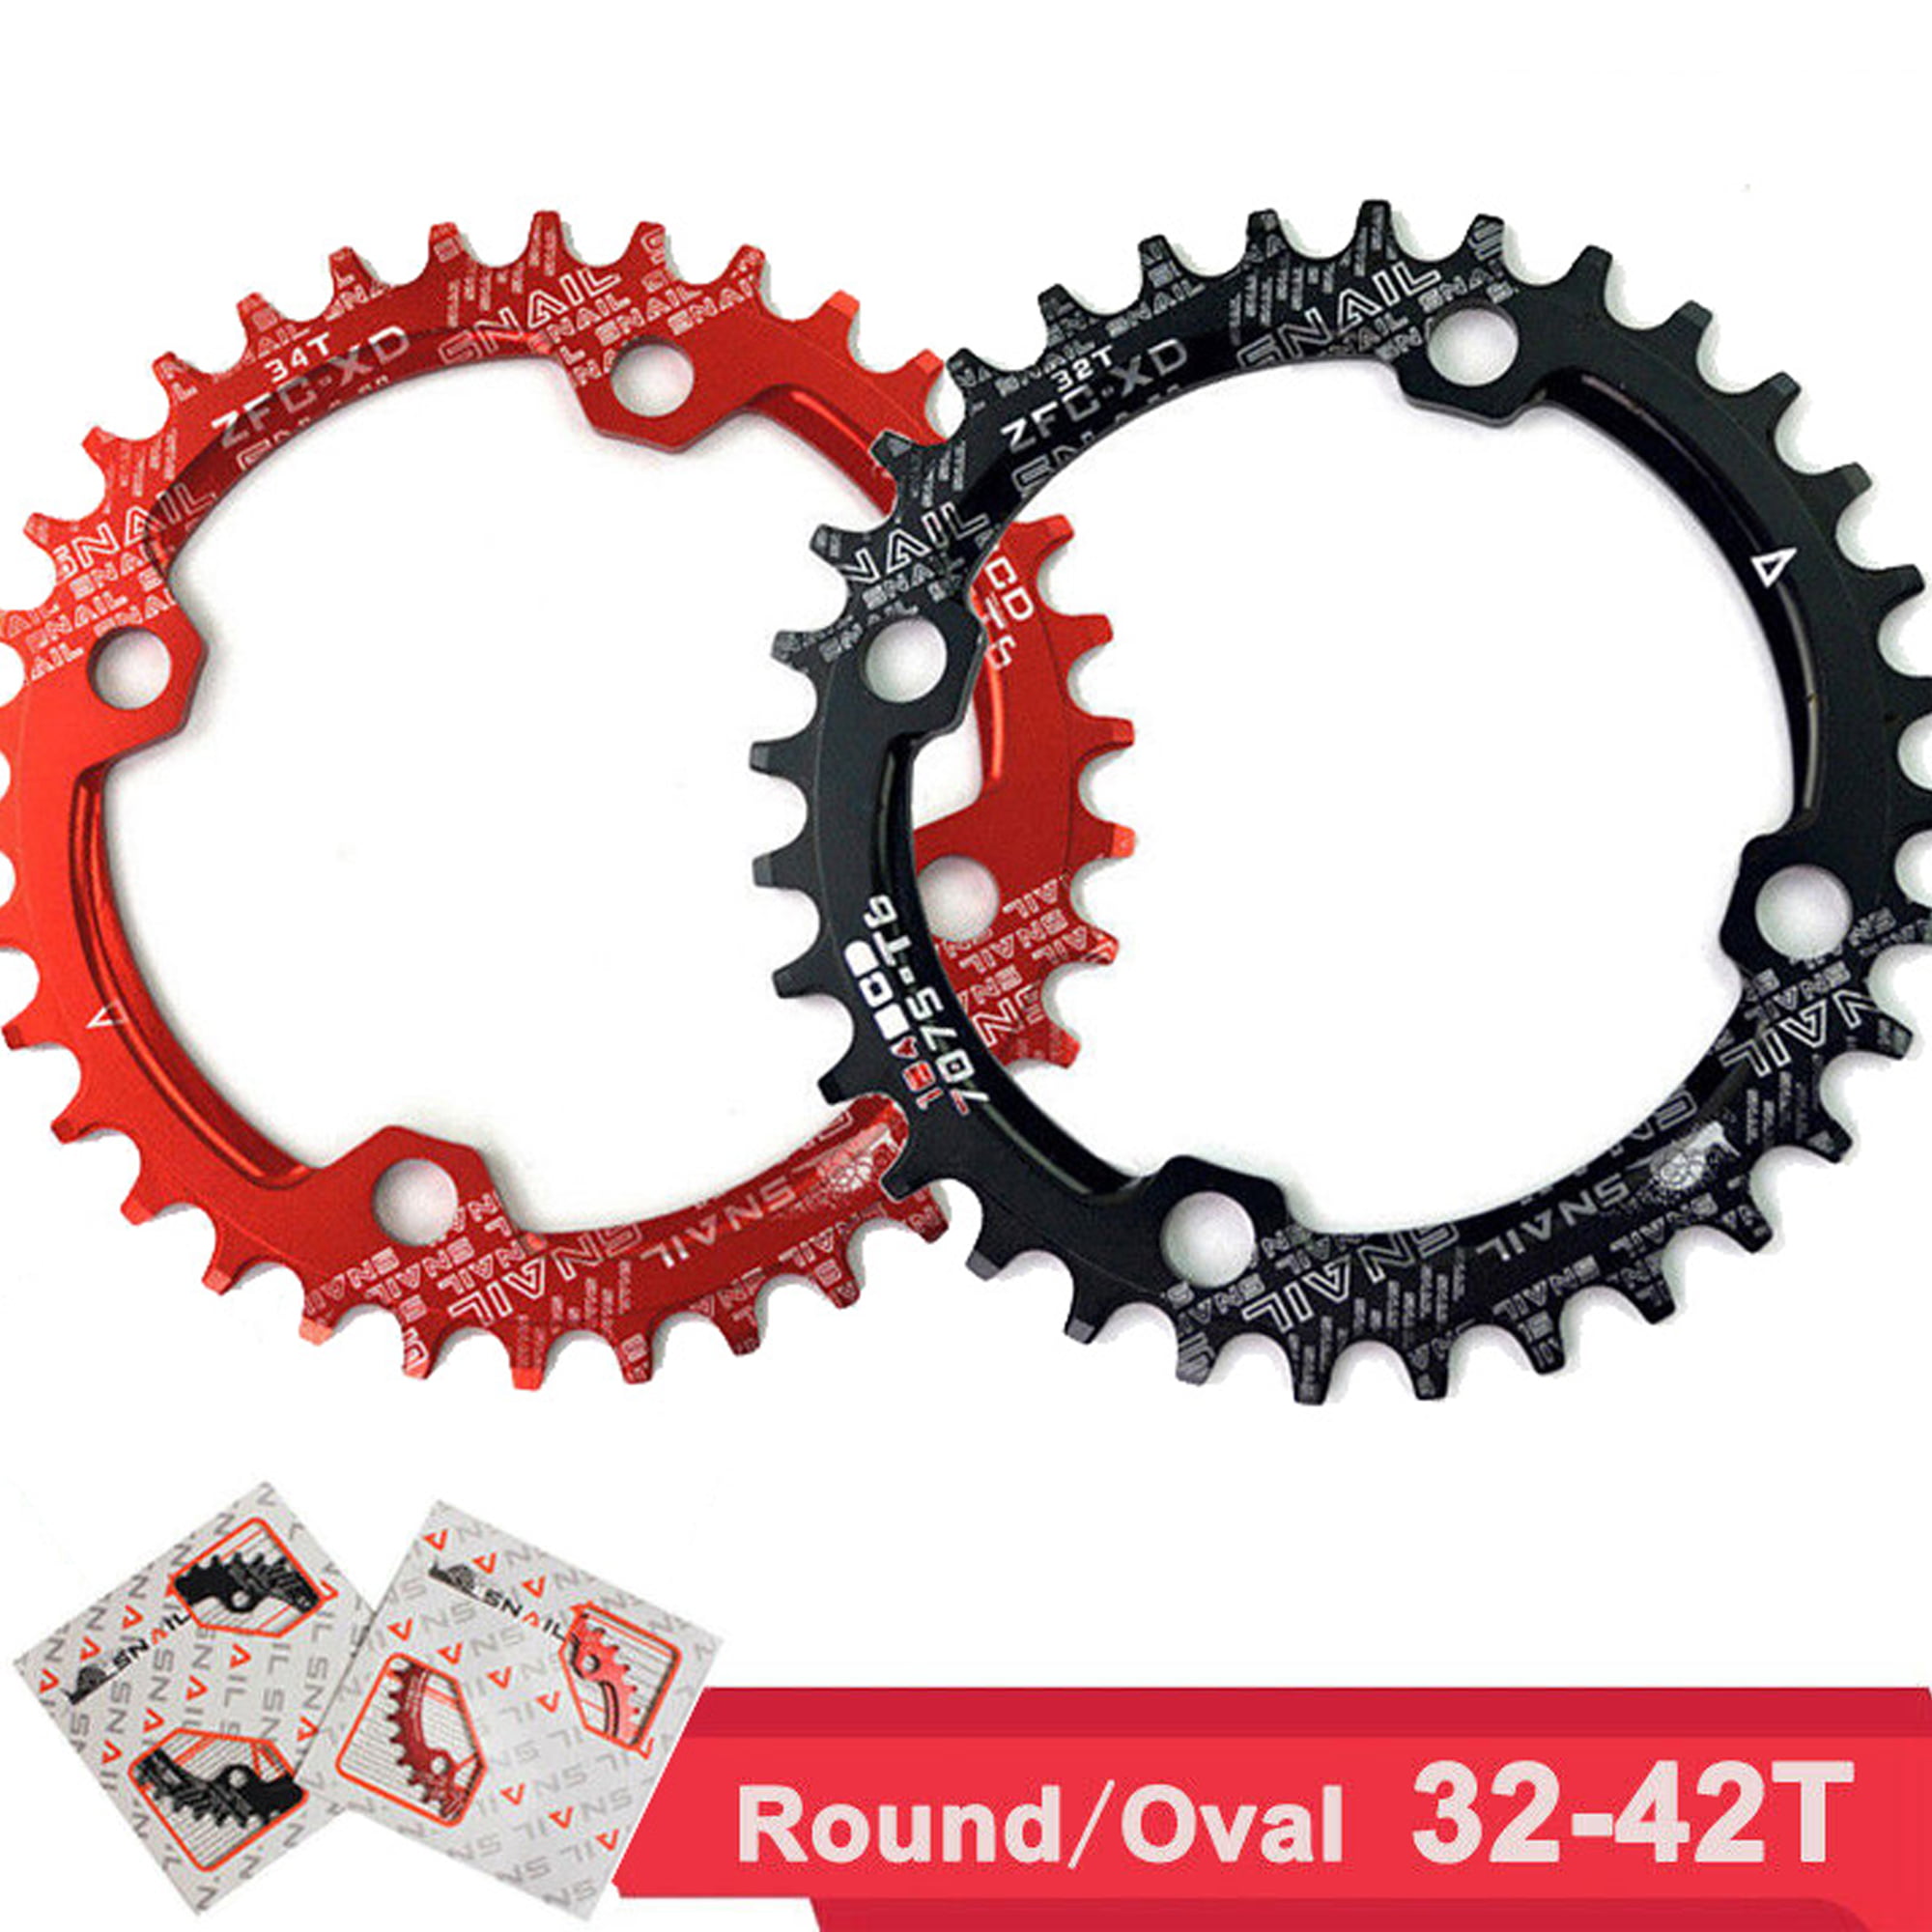 Tbest 32/34/36/38T Single Chainring Narrow Wide Chainring 104 BCD BMX MTB Road Mountain Bike Bicycle Single Speed Crank Chain Ring Repair Parts Black Red 